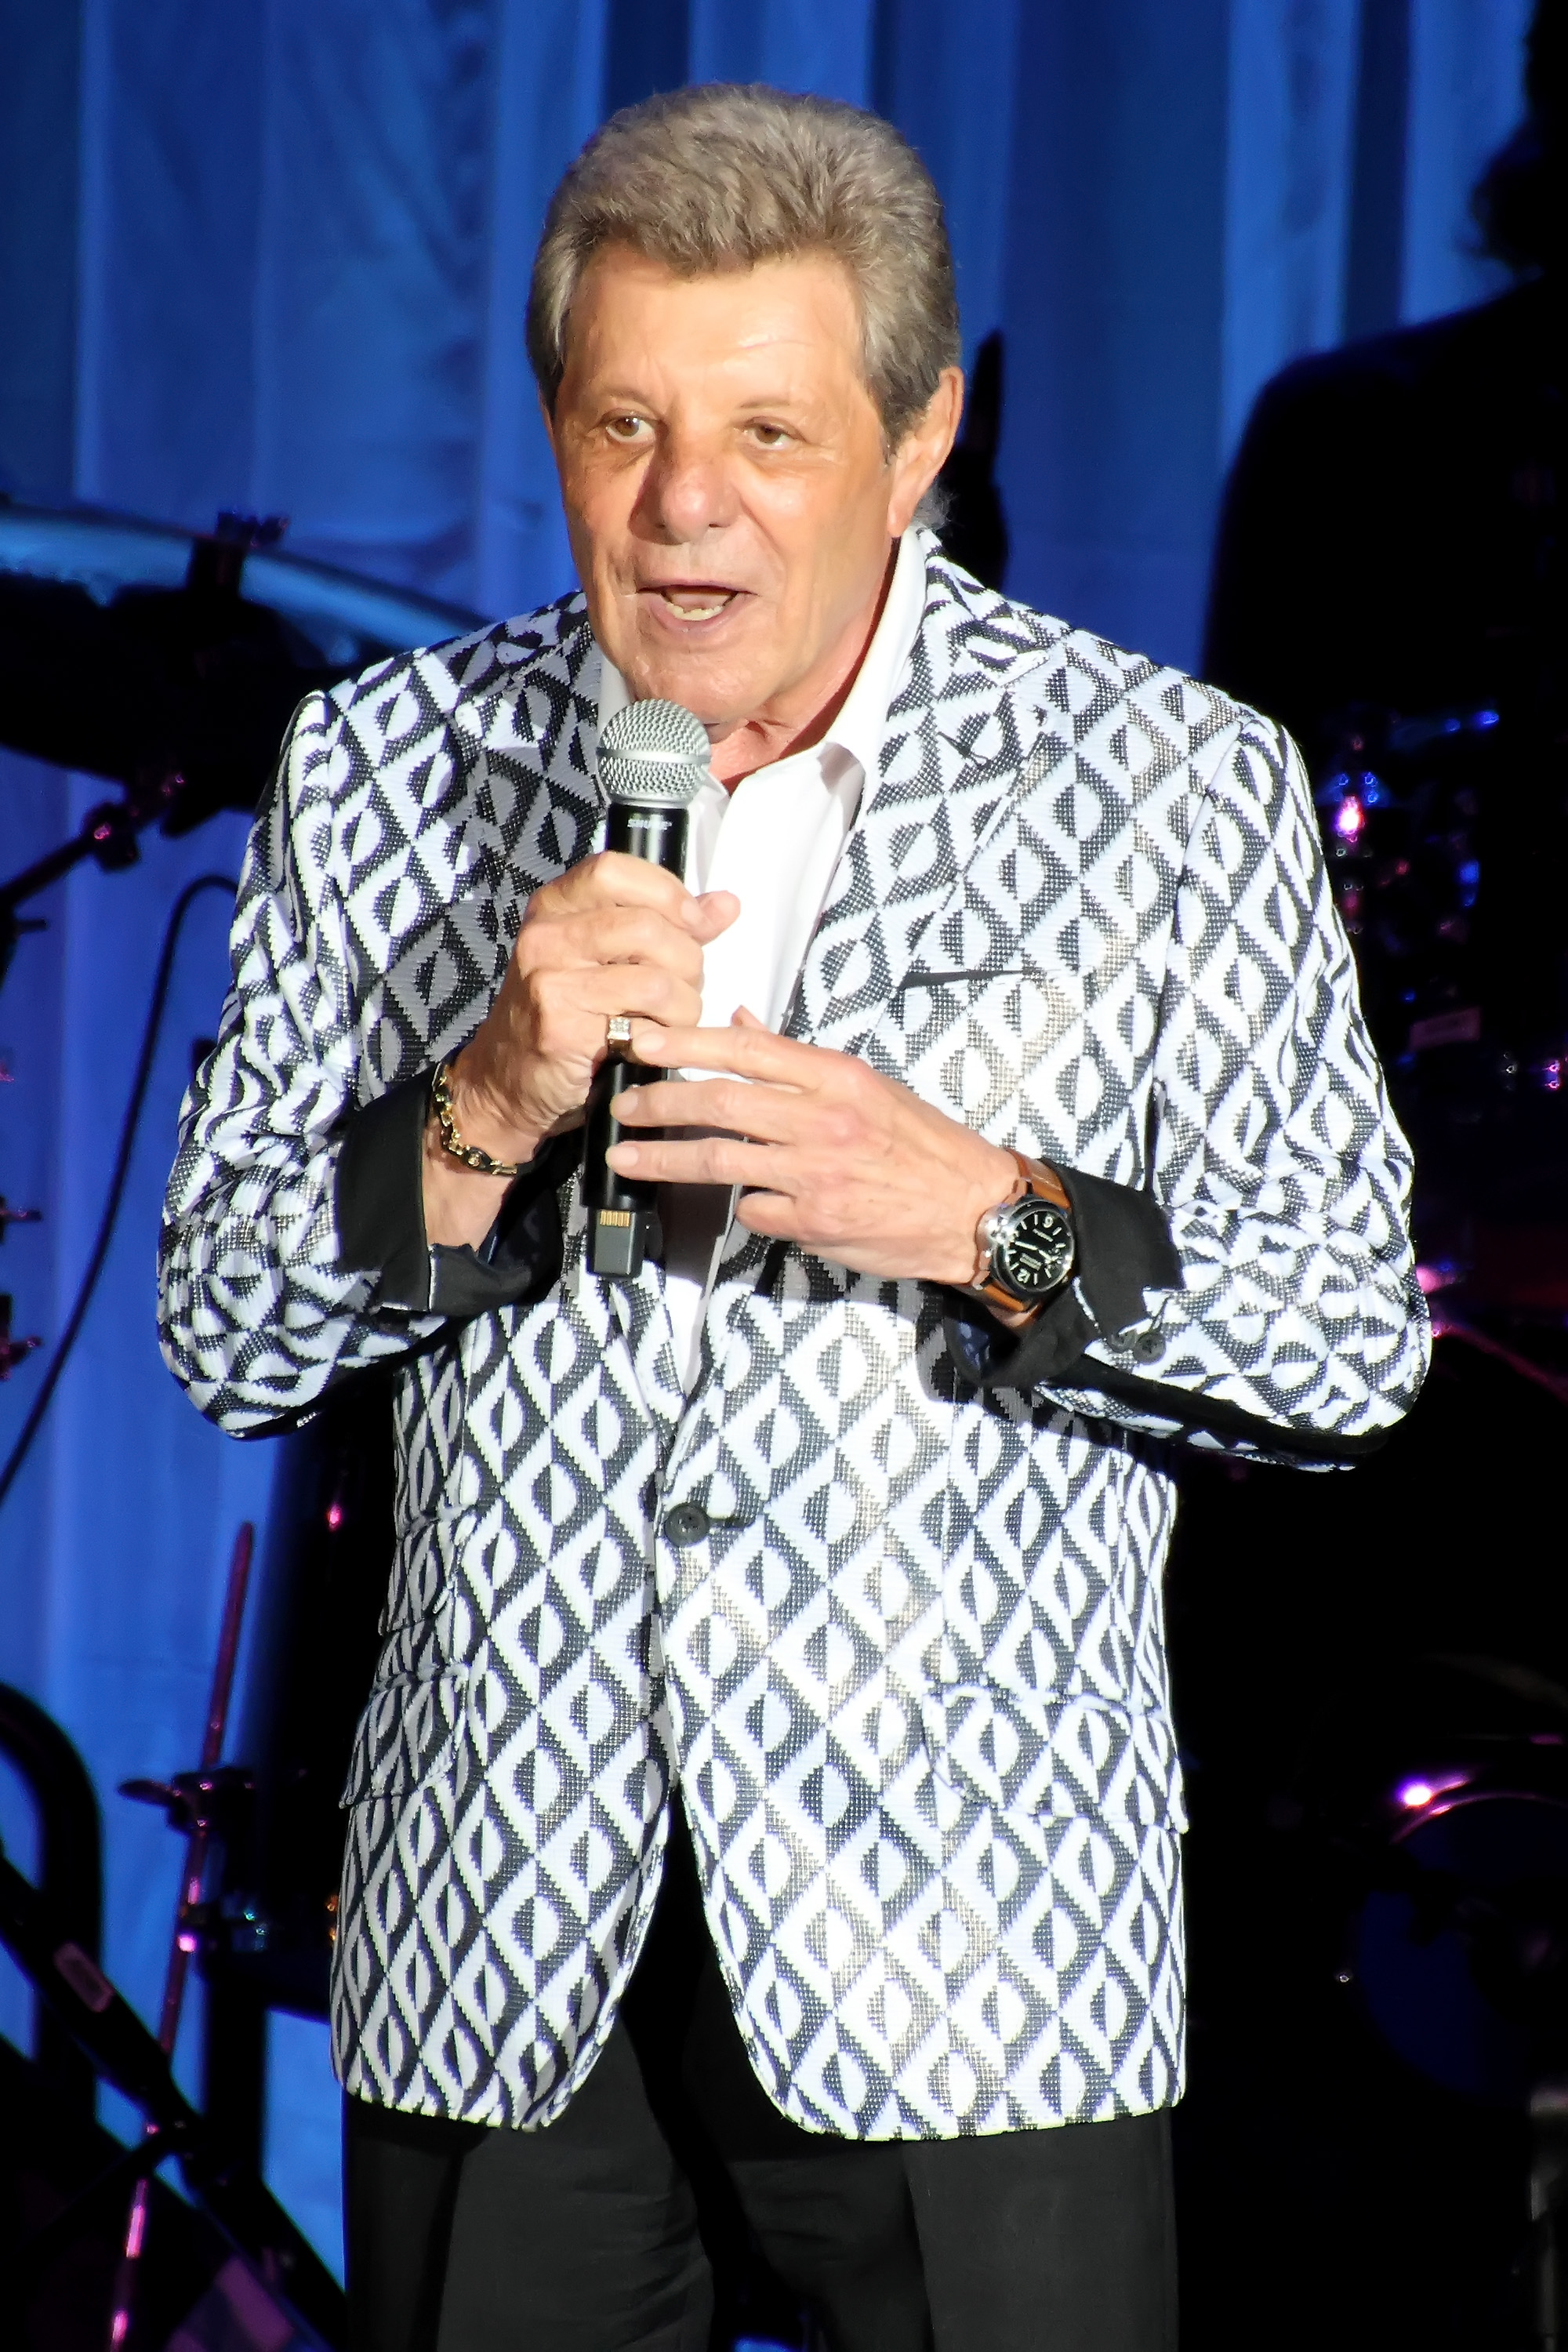 Frankie Avalon performs at Golden Nugget on April 22, 2023 in Atlantic City, New Jersey. | Source: Getty Images